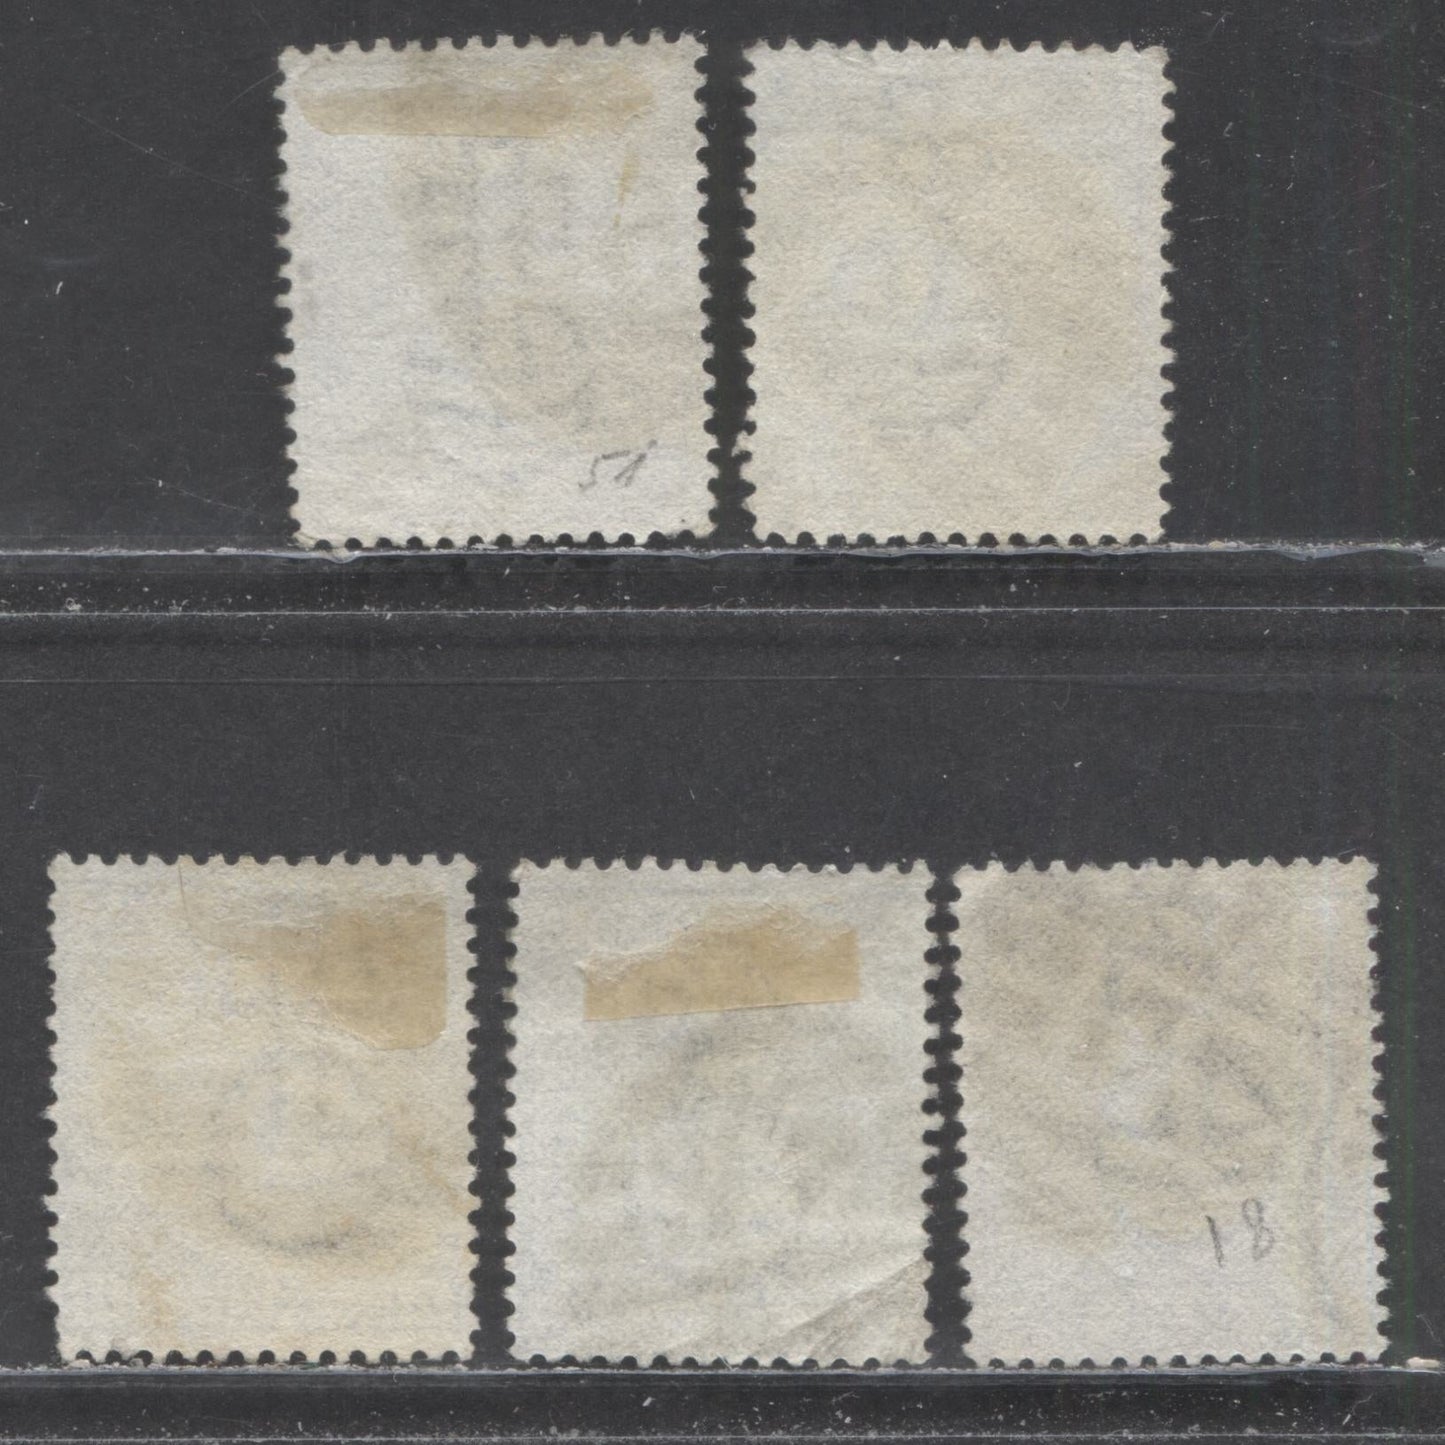 Lot 153 Great Britain SC#68 (SG#142) 2 1/2d Blue 1880 Large Coloured Corner Letters - Surface-Printed Issue, Plate 18 Printing, Orb Wmk, London District Cancels, 5 Very Good Used Examples, Click on Listing to See ALL Pictures, Estimated Value $68